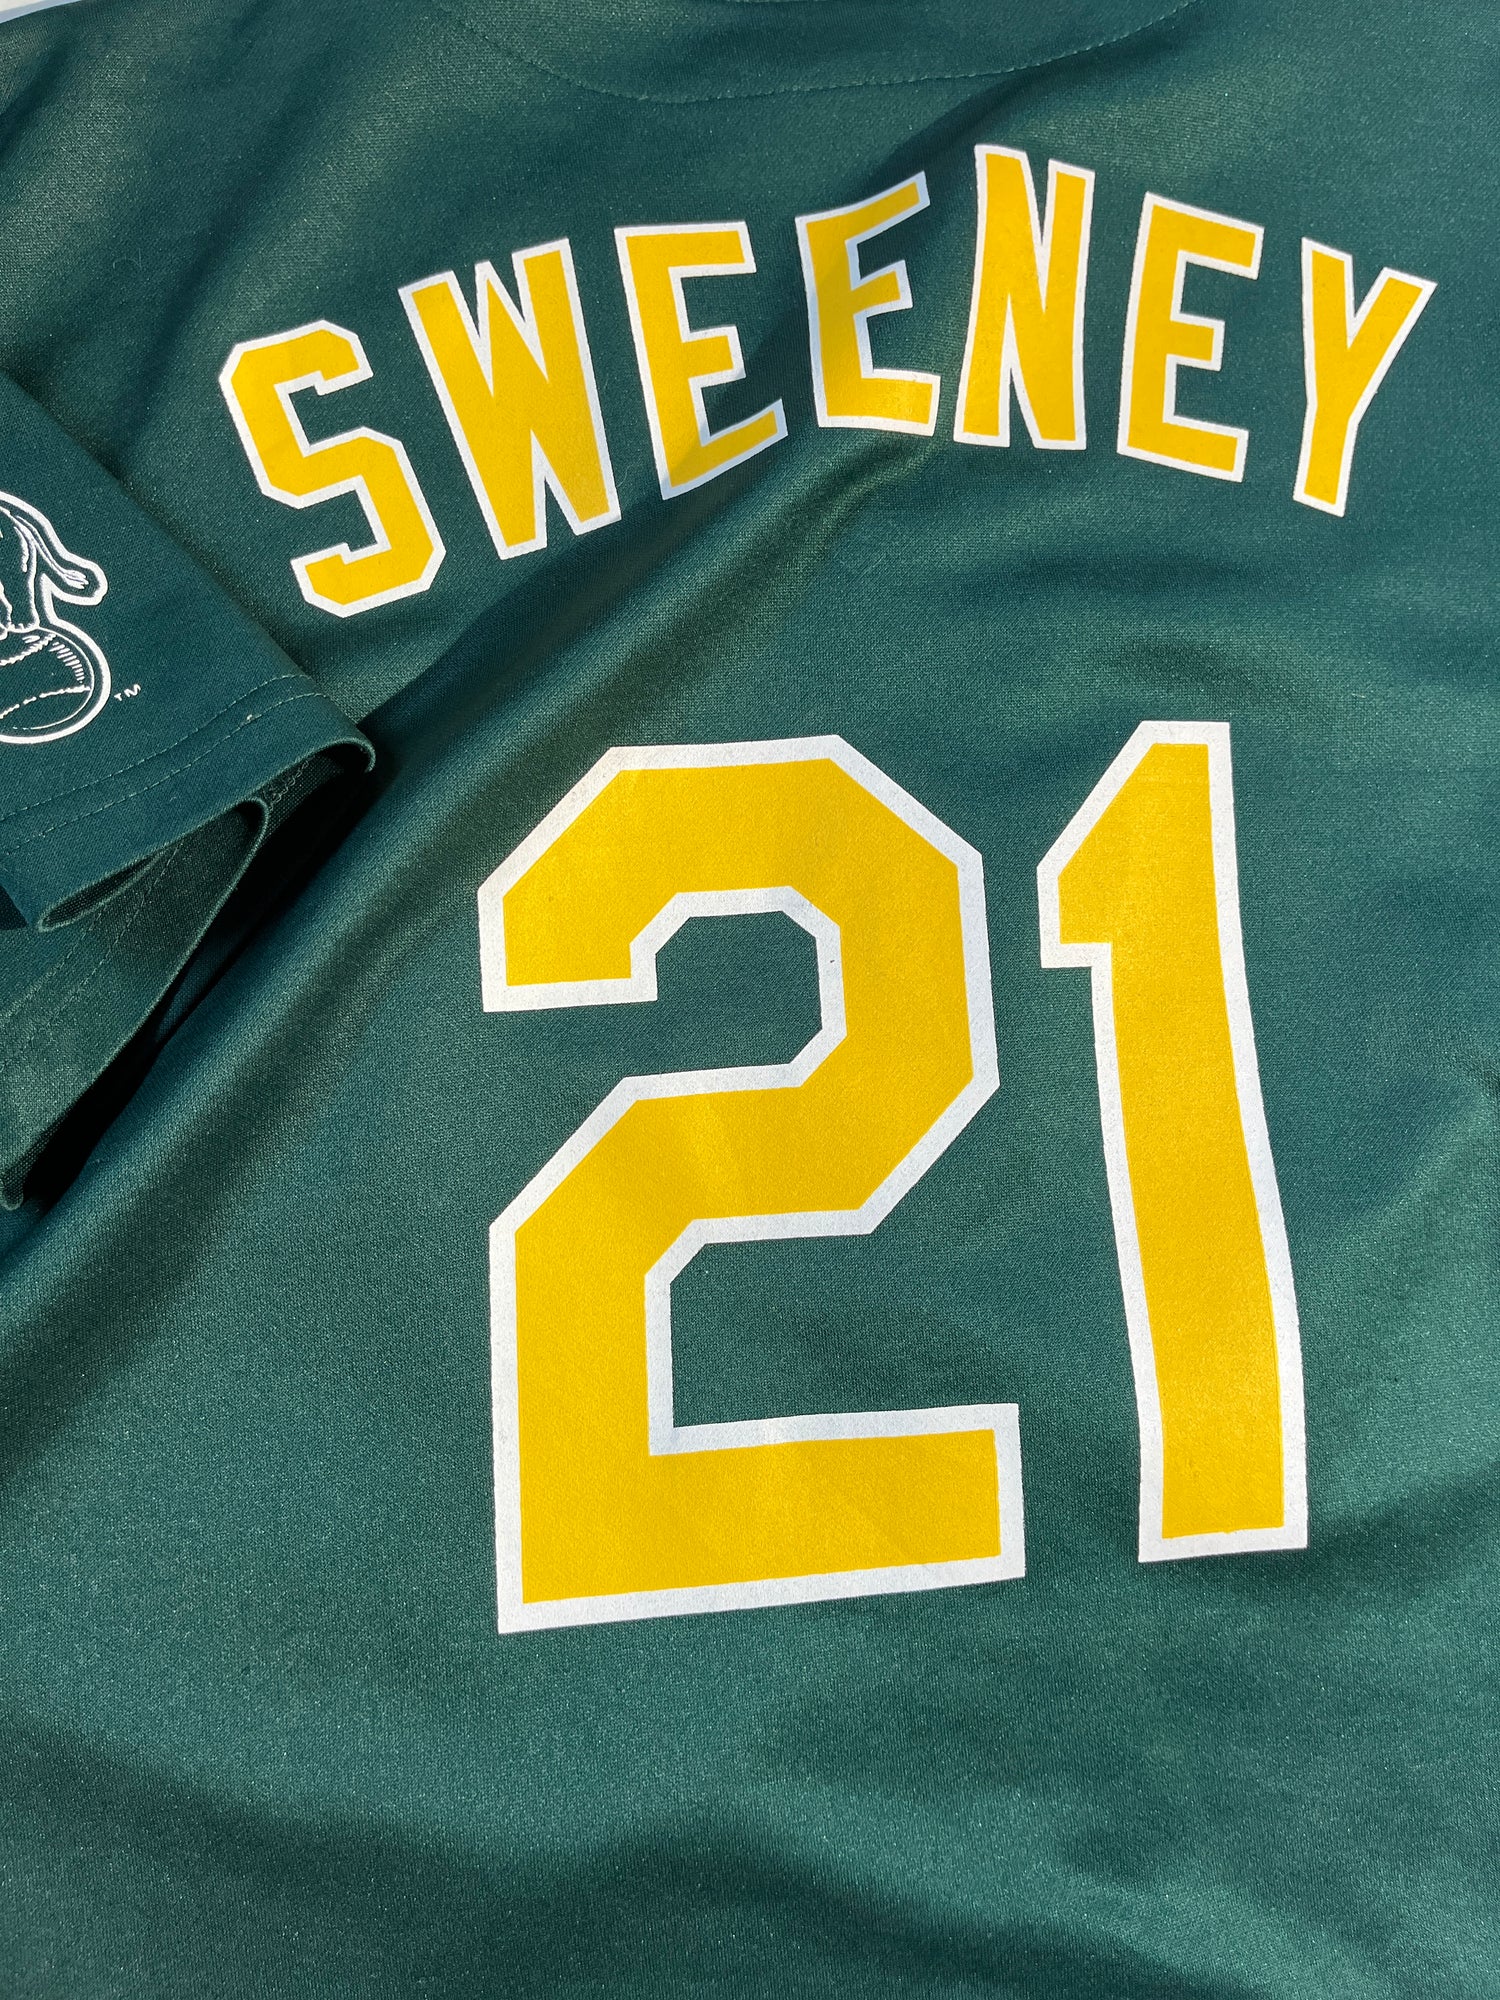 Oakland A' white sox field of dreams jersey buy s Game #34: A's